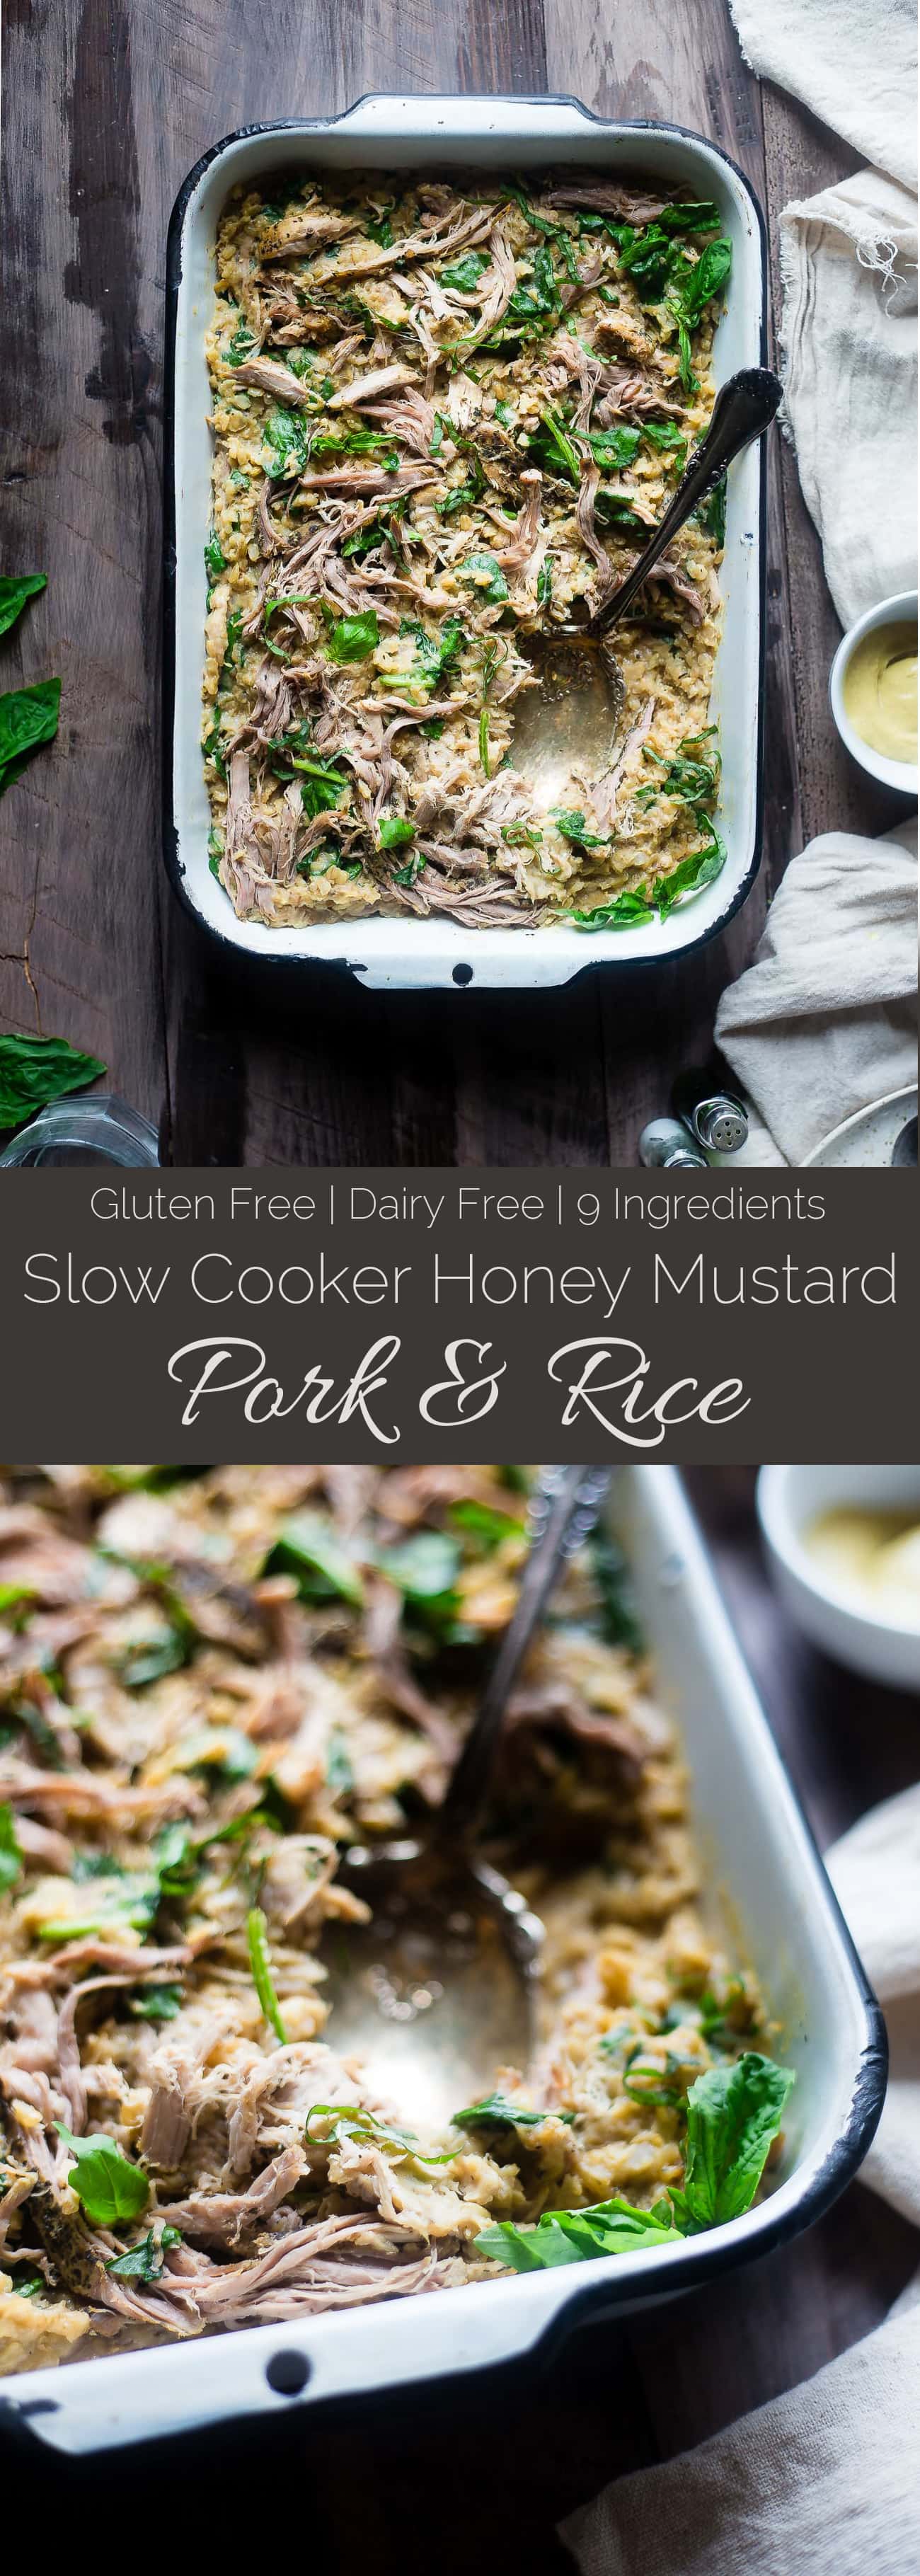 Slow Cooker Honey Mustard Pork and Rice - Let the slow cooker do the work for you with this healthy honey mustard slow cooker pork loin and rice that's gluten free, under 10 ingredients and so easy! | Foodfaithfitness.com | @FoodFaithFit